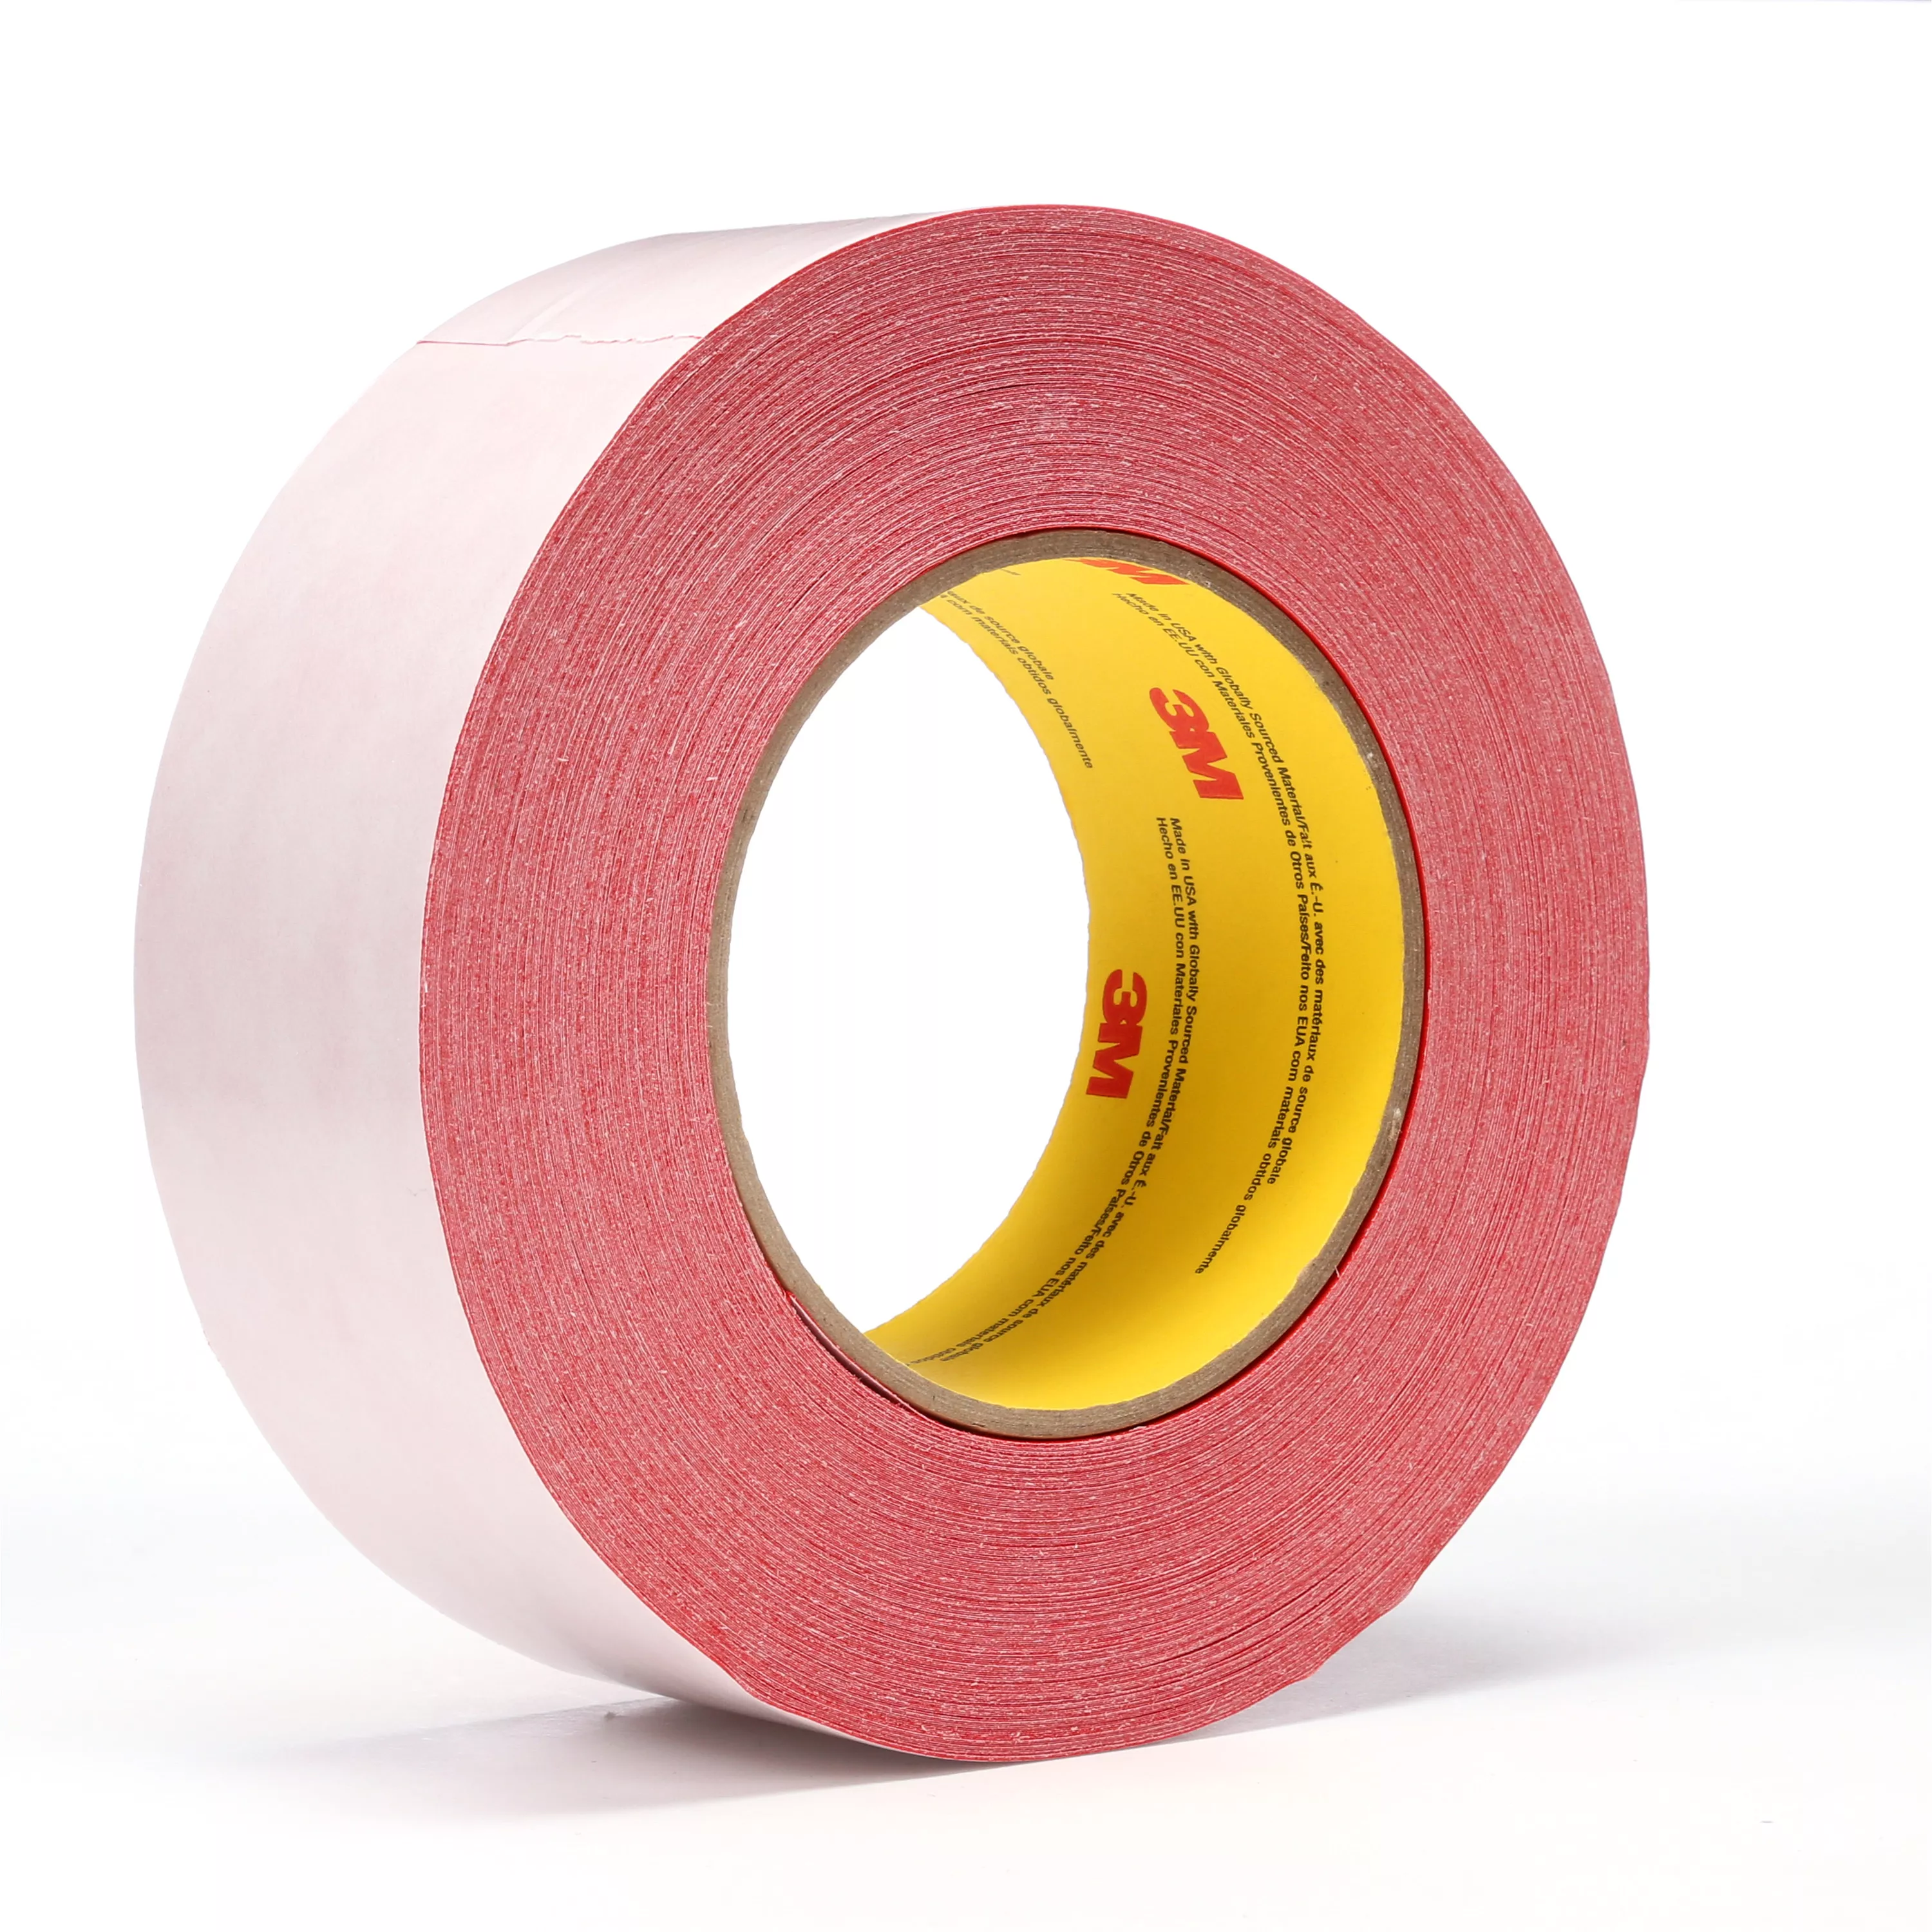 3M™ Double Coated Tape 9737R, Red, 48 mm x 55 m, 3.5 mil, 24 Roll/Case